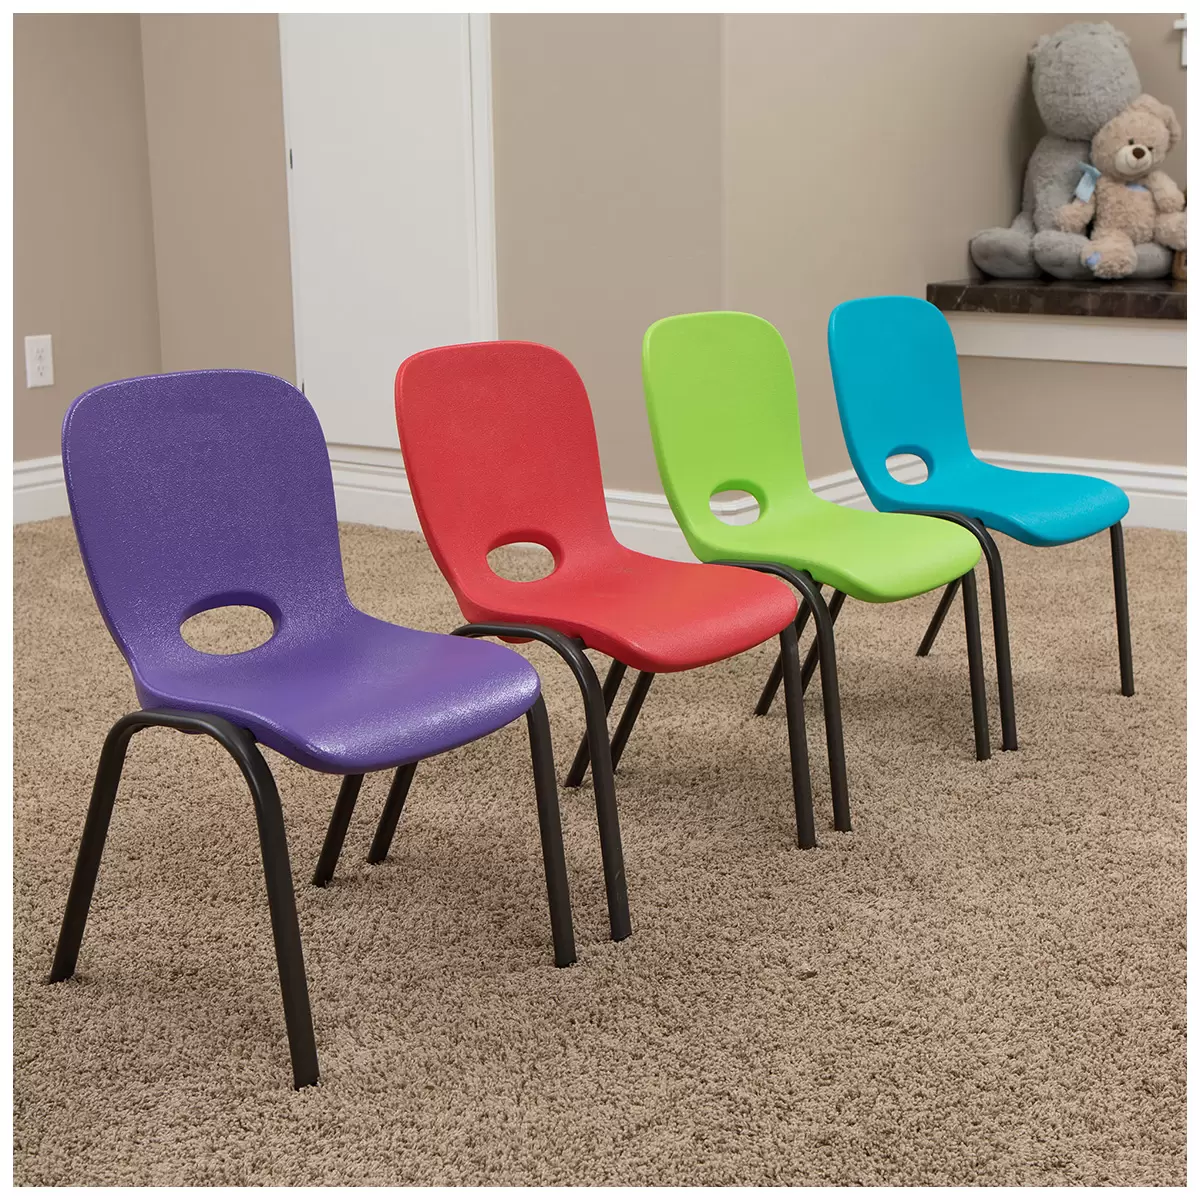 Lifetime Kids' Stackable Chair 2 Pack